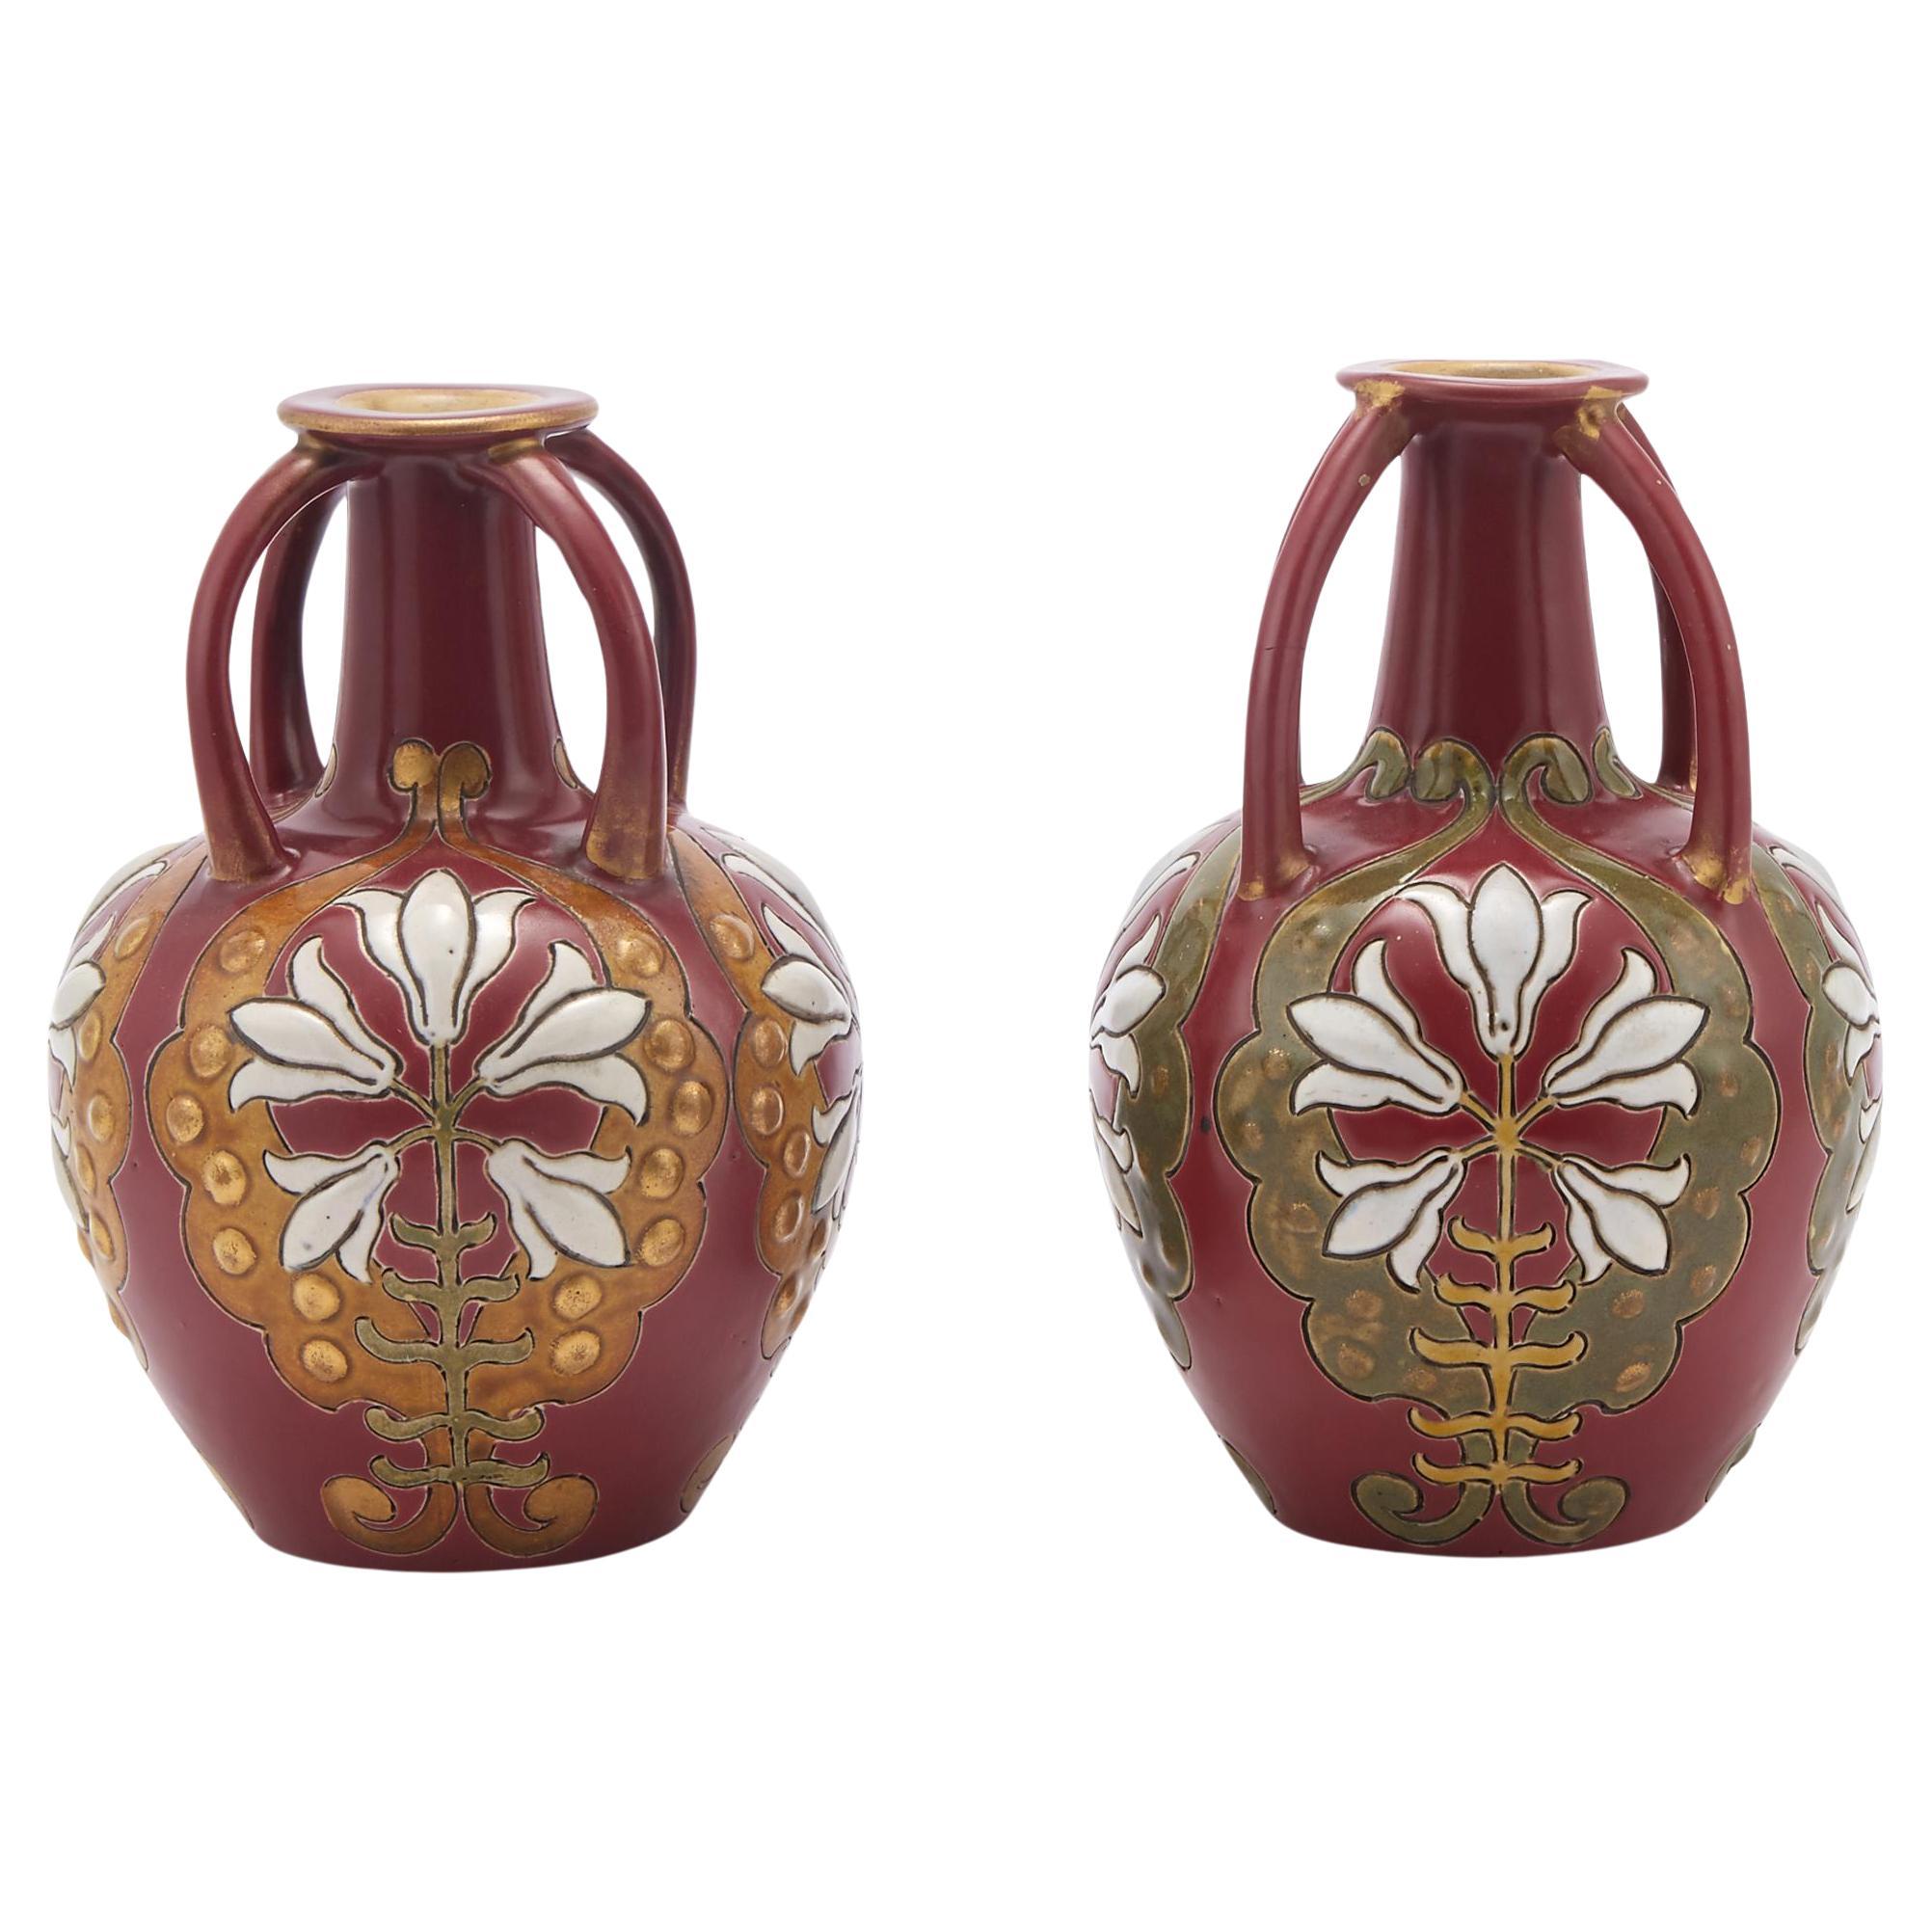 Mid 20th century Hand-Painted / decorated Pair Decorative Vases